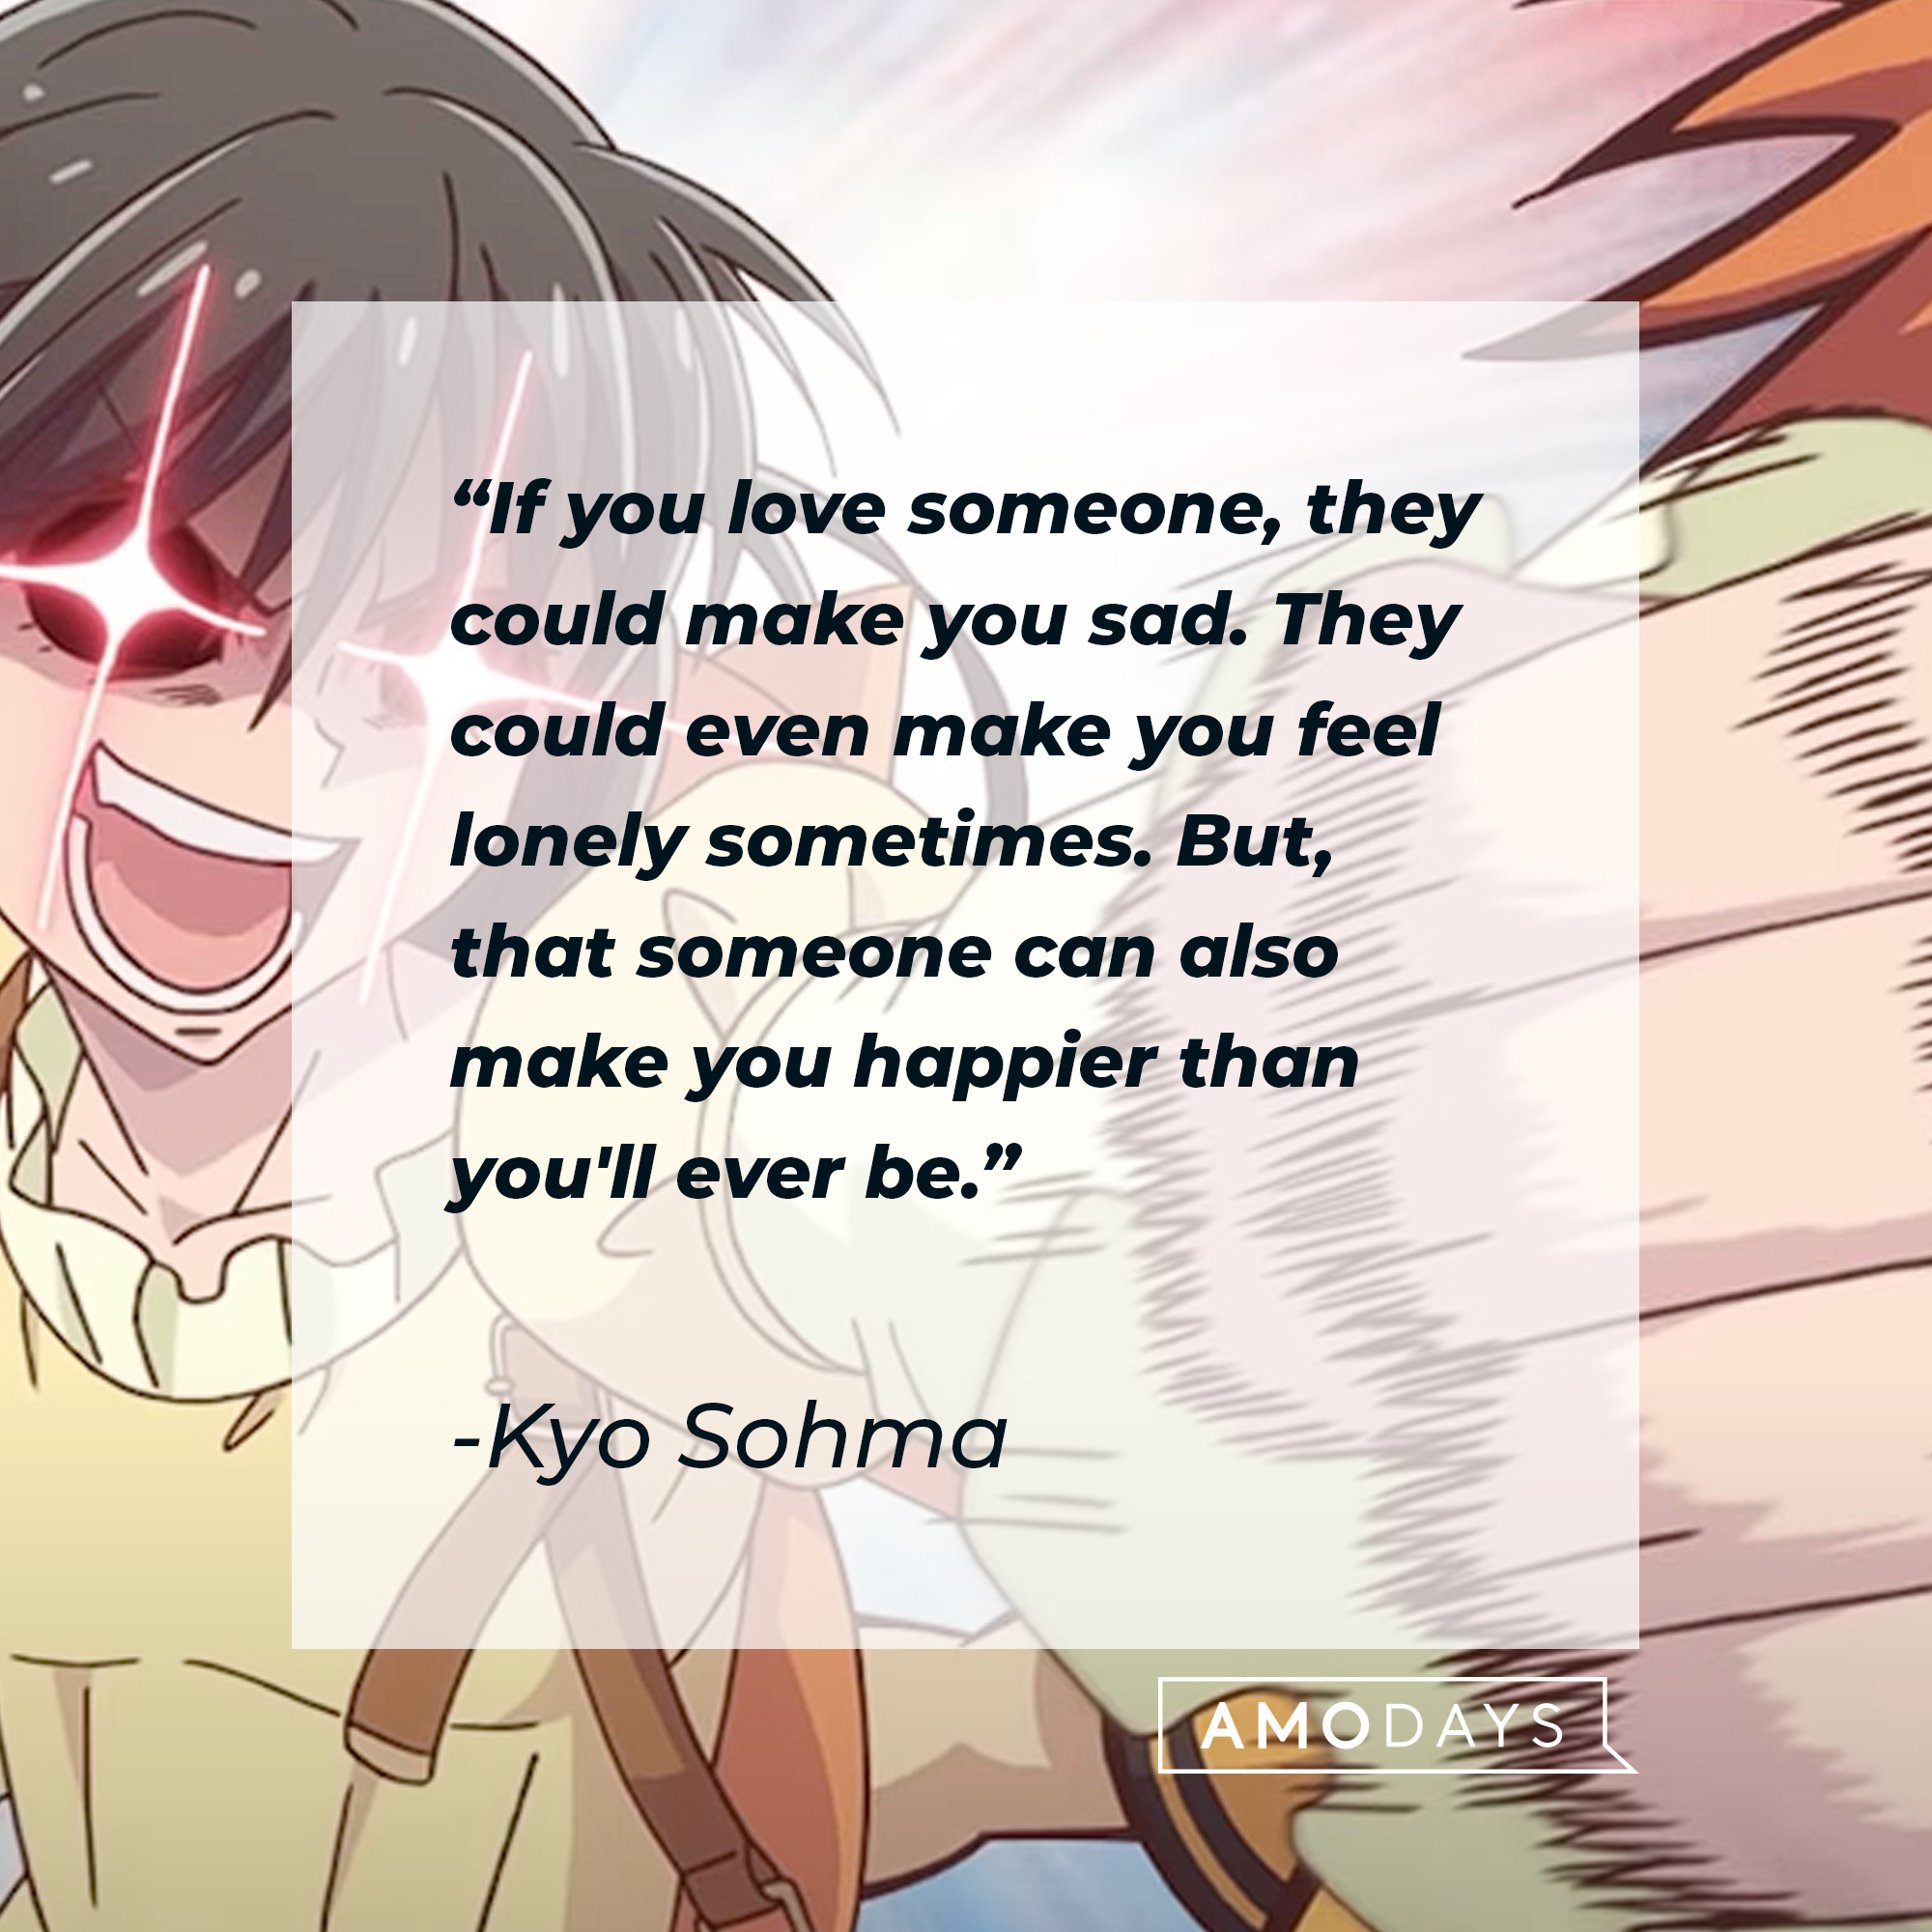 Kyo Sohma's quote: "If you love someone, they could make you sad. They could even make you feel lonely sometimes. But, that someone can also make you happier than you'll ever be." | Image: youtube.com/Crunchyroll Collection